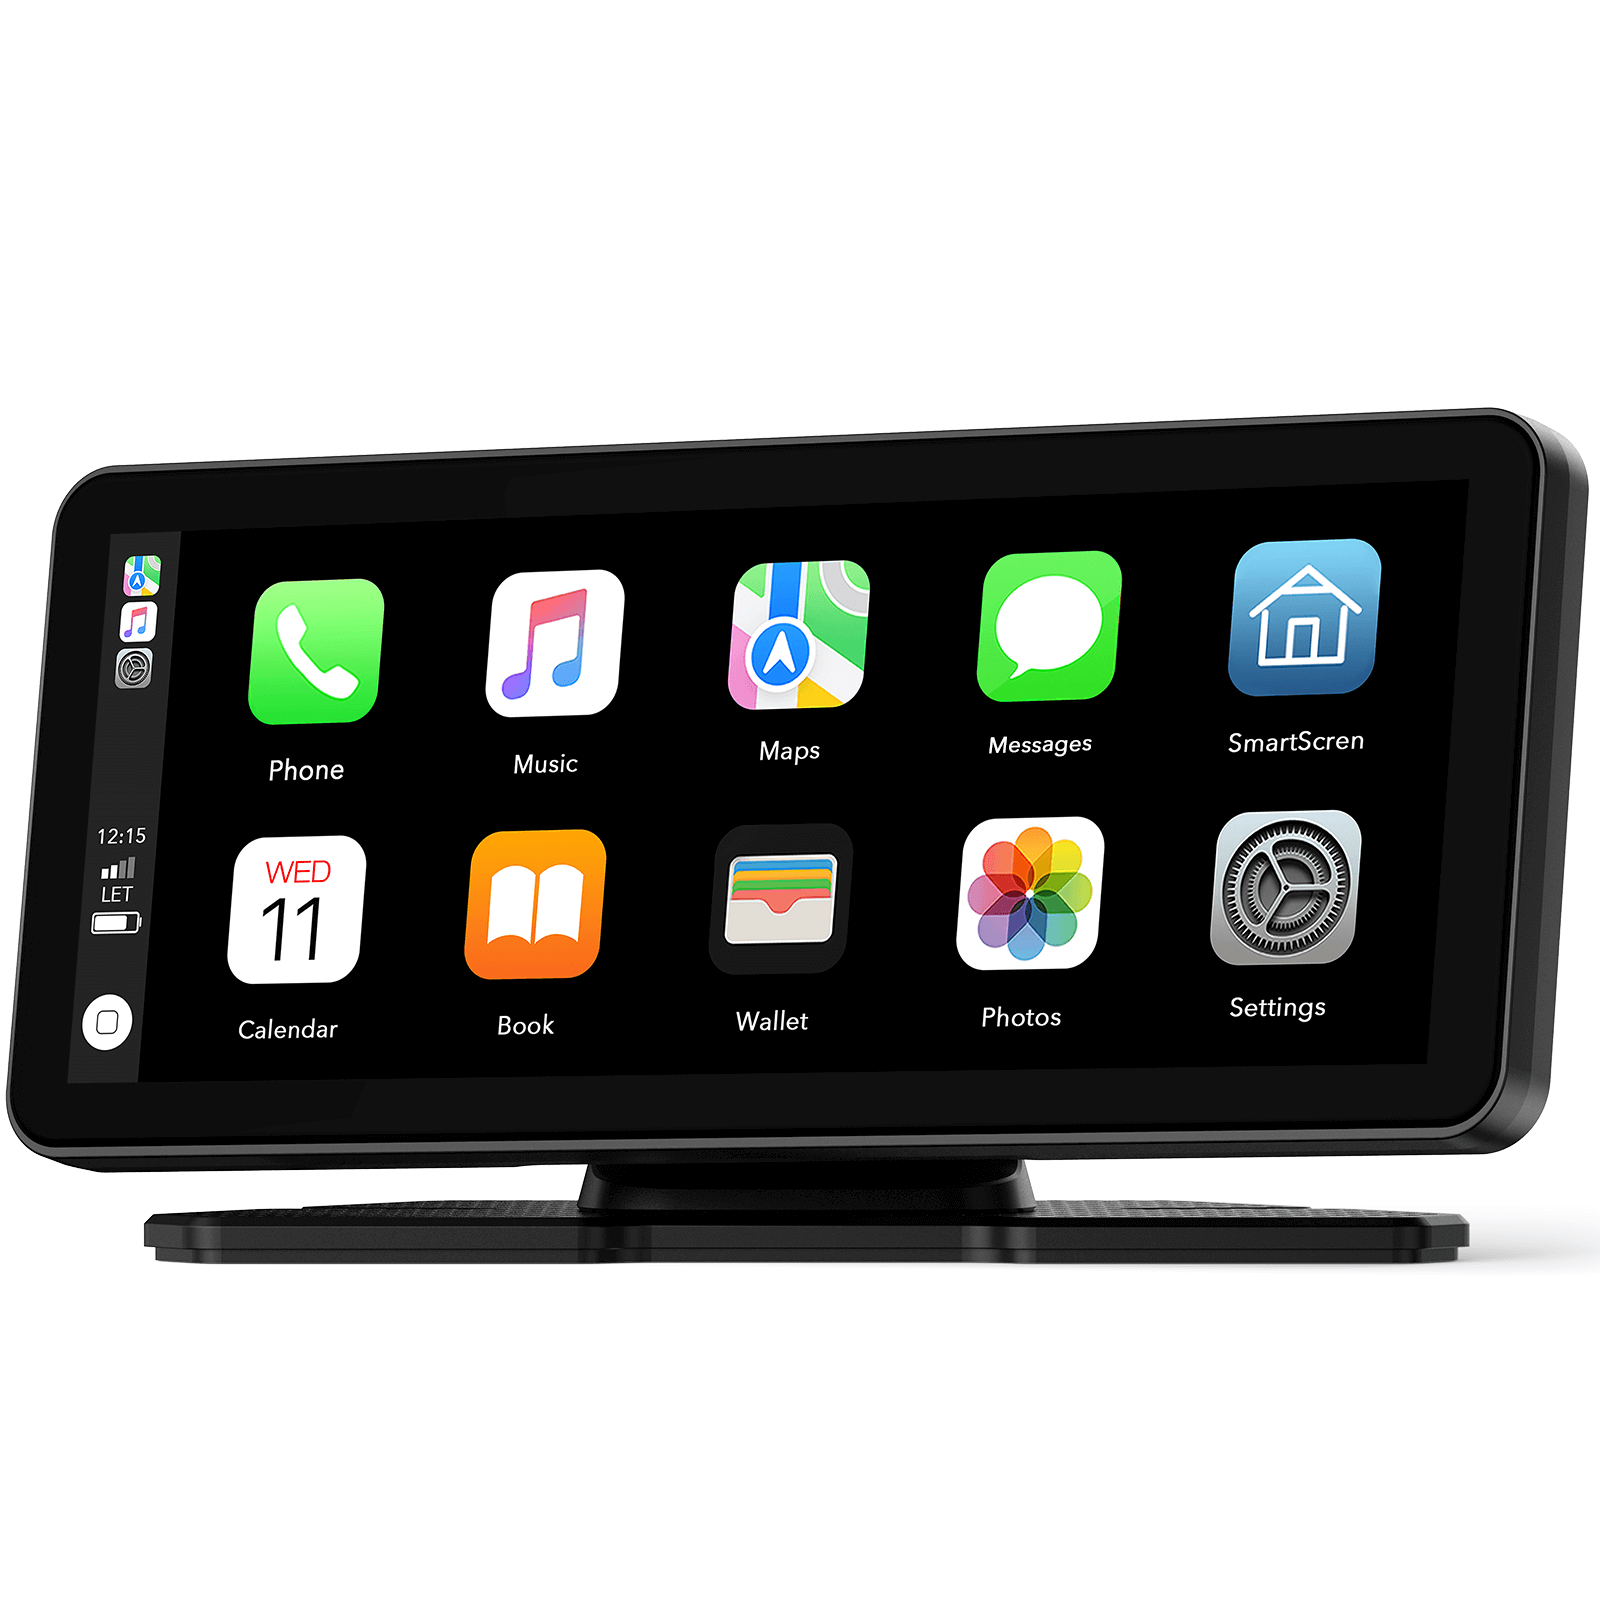 Lamtto RC09 6.86" Carplay & Android Auto Screen With Dual Cam Comes With 64GB SD Card